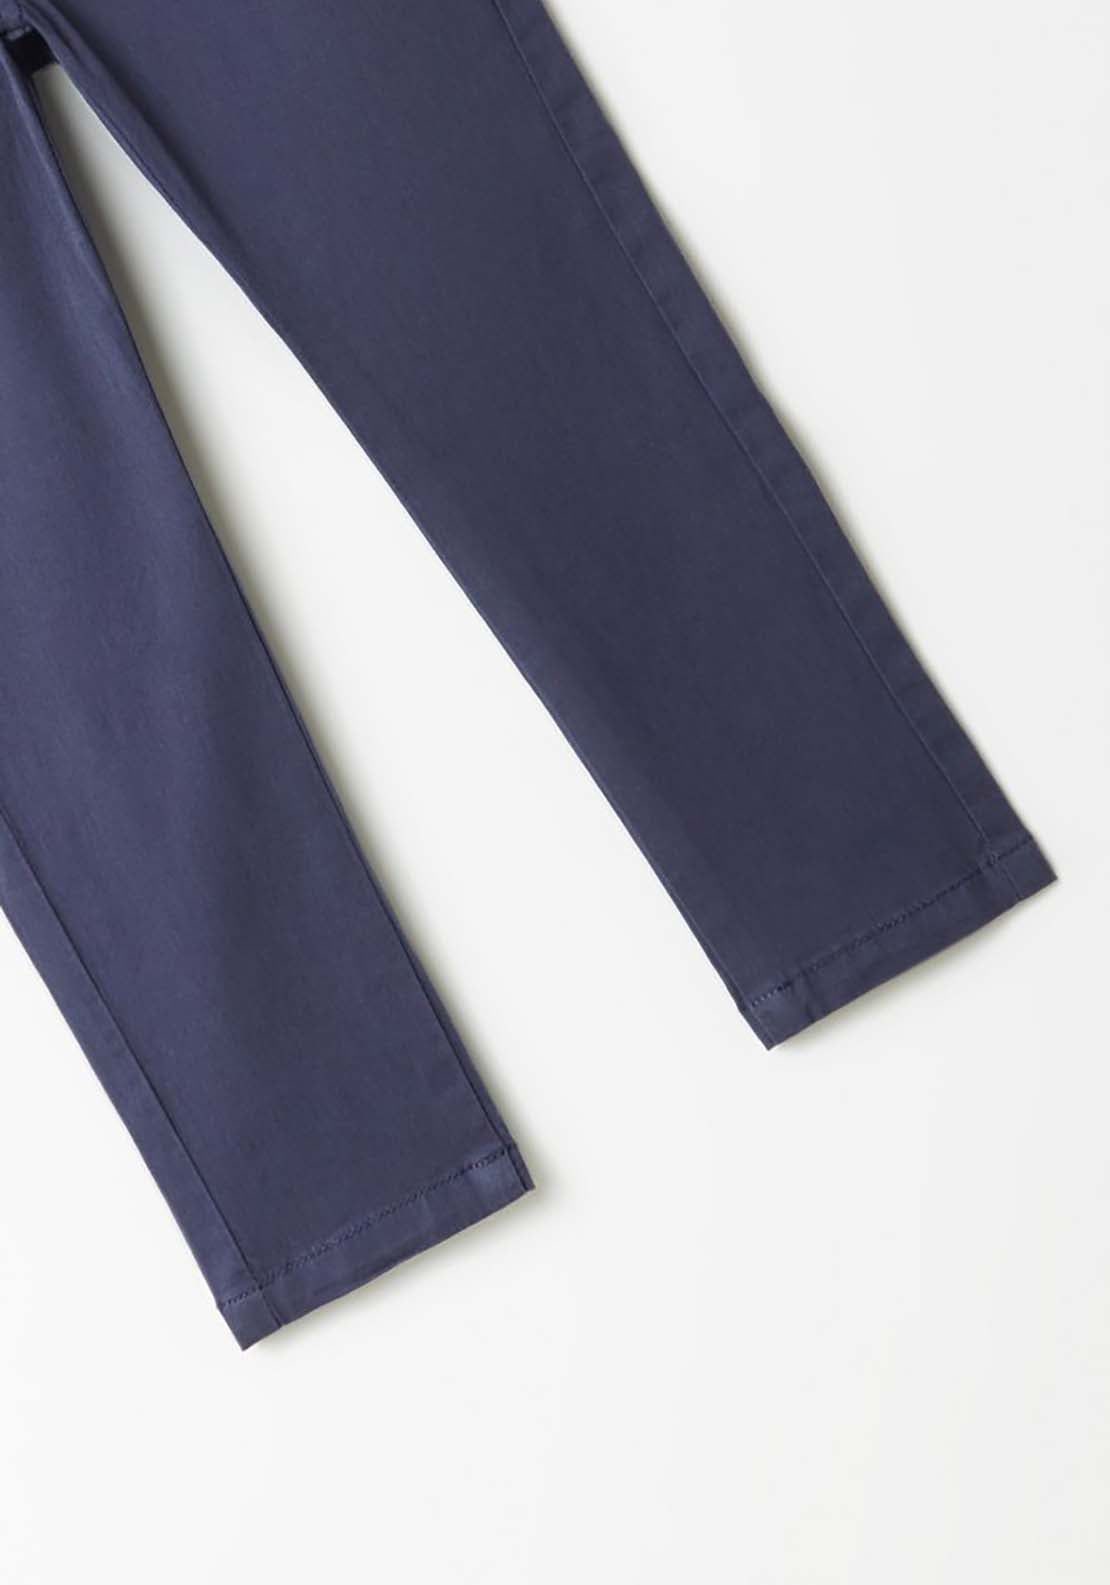 Sfera Formal Plain Trousers - Navy / Blue 4 Shaws Department Stores